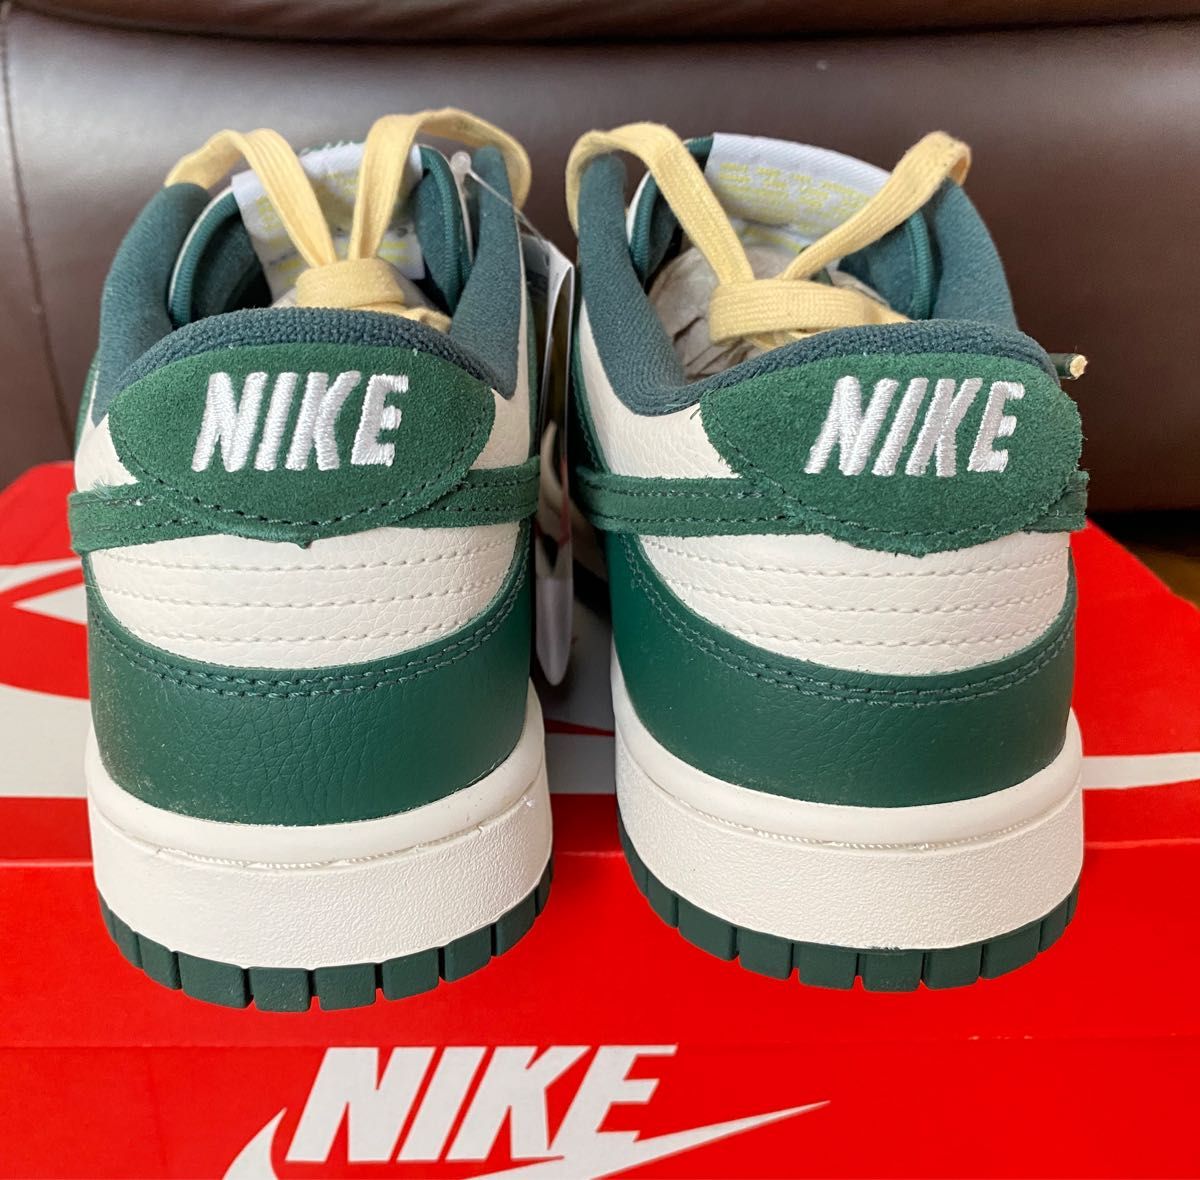 28cm ナイキ ダンク LOW SE / Nike Dunk Shoes